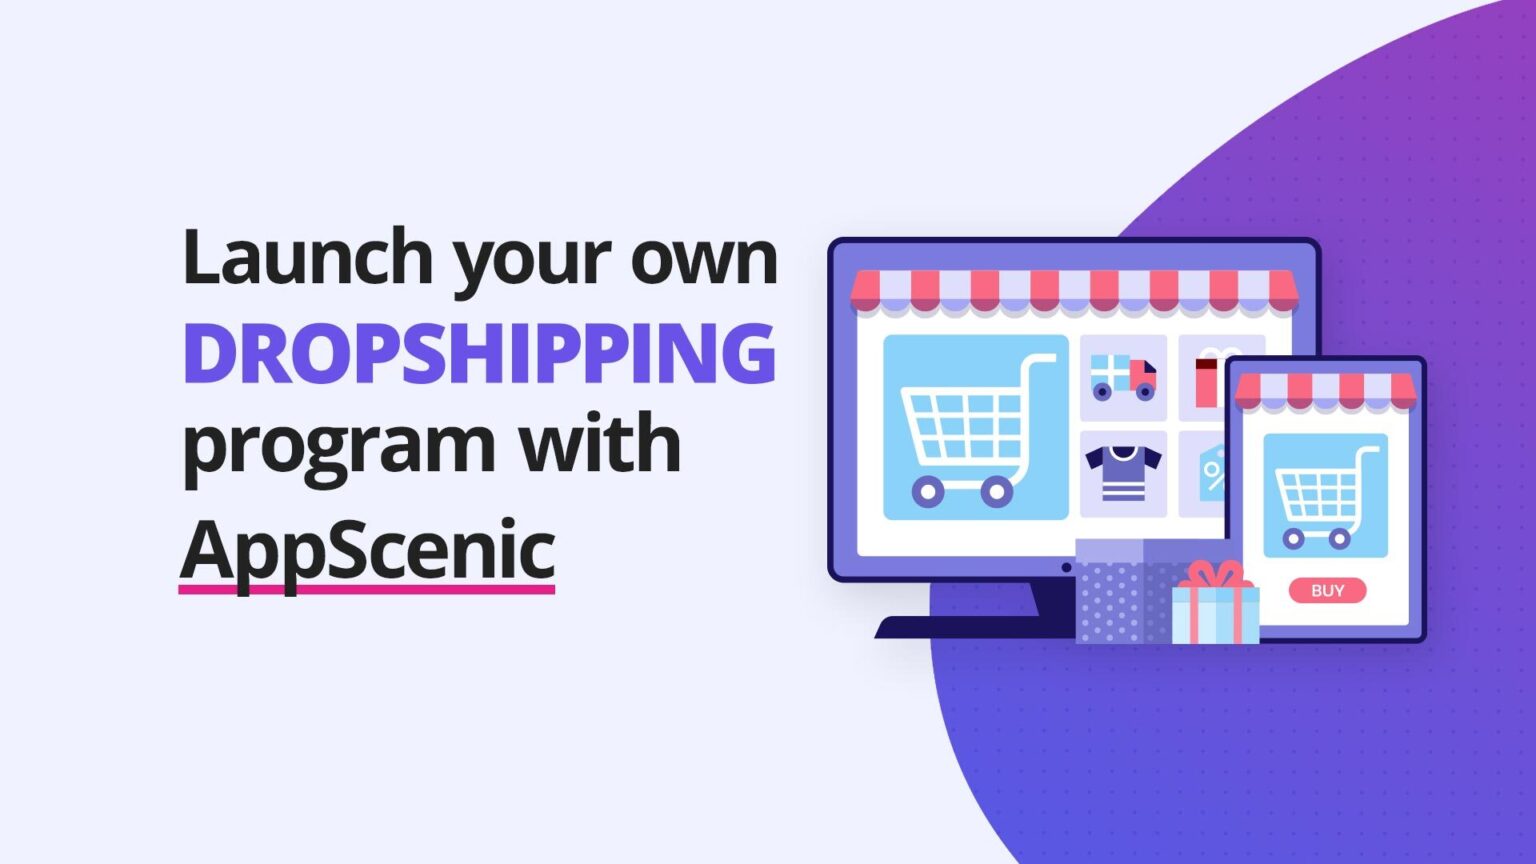 How to launch your own dropshipping program -  